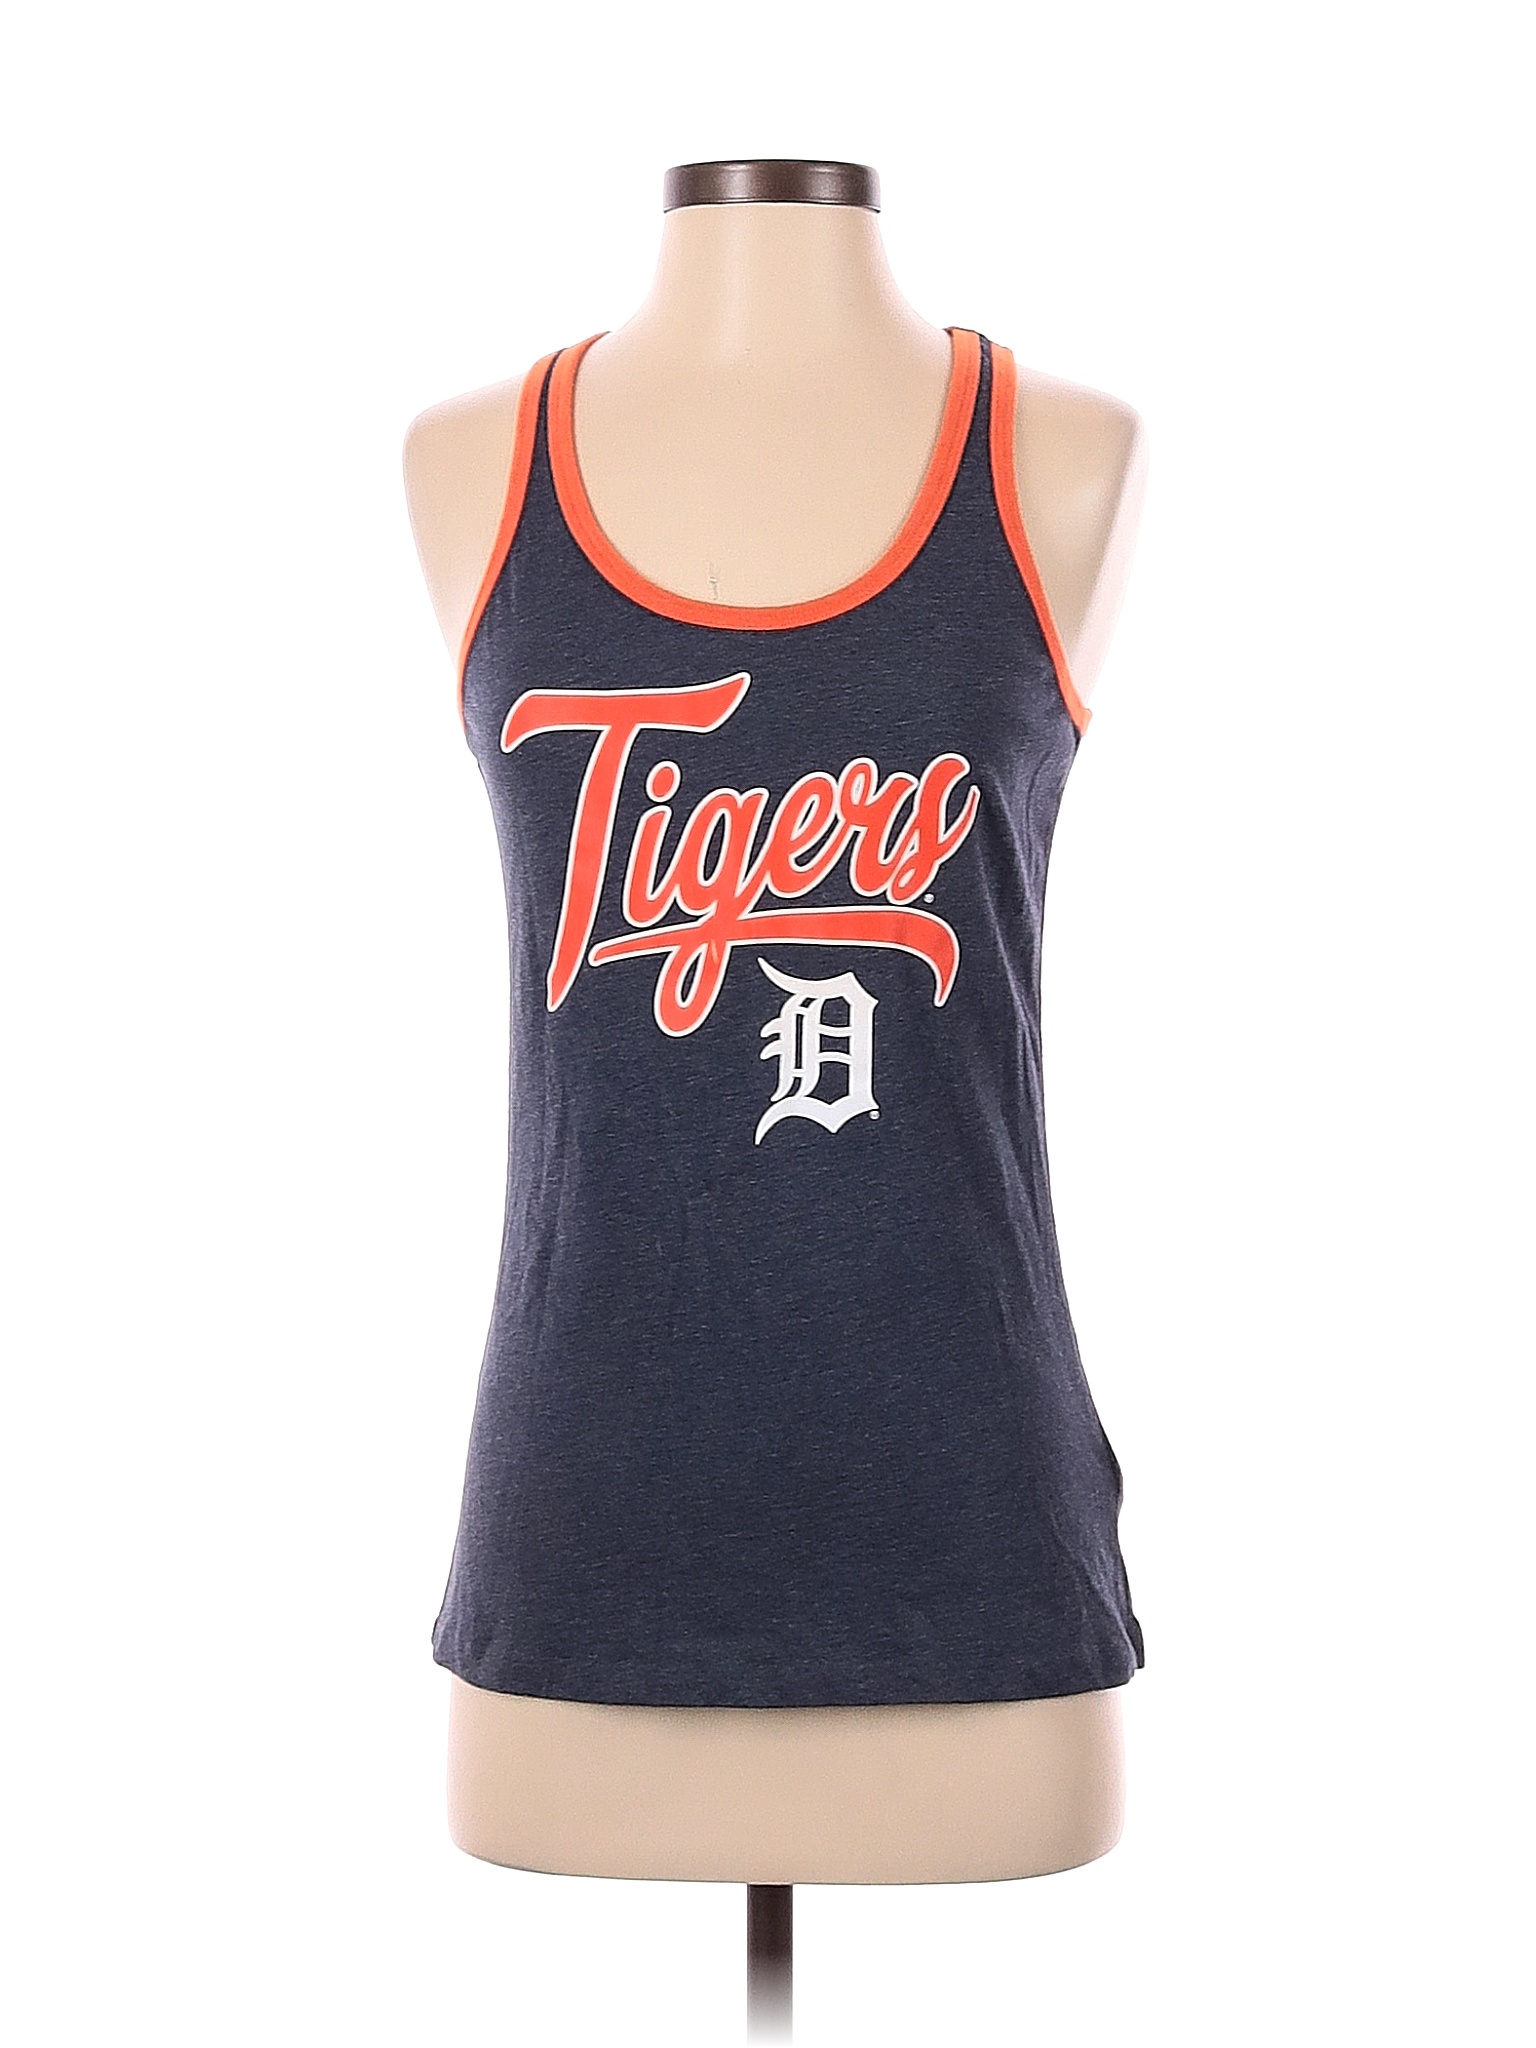 Campus Lifestyle, Tops, Detroit Tigers Womens Ss Tshirt By Campus  Lifestylemlb Genuine M